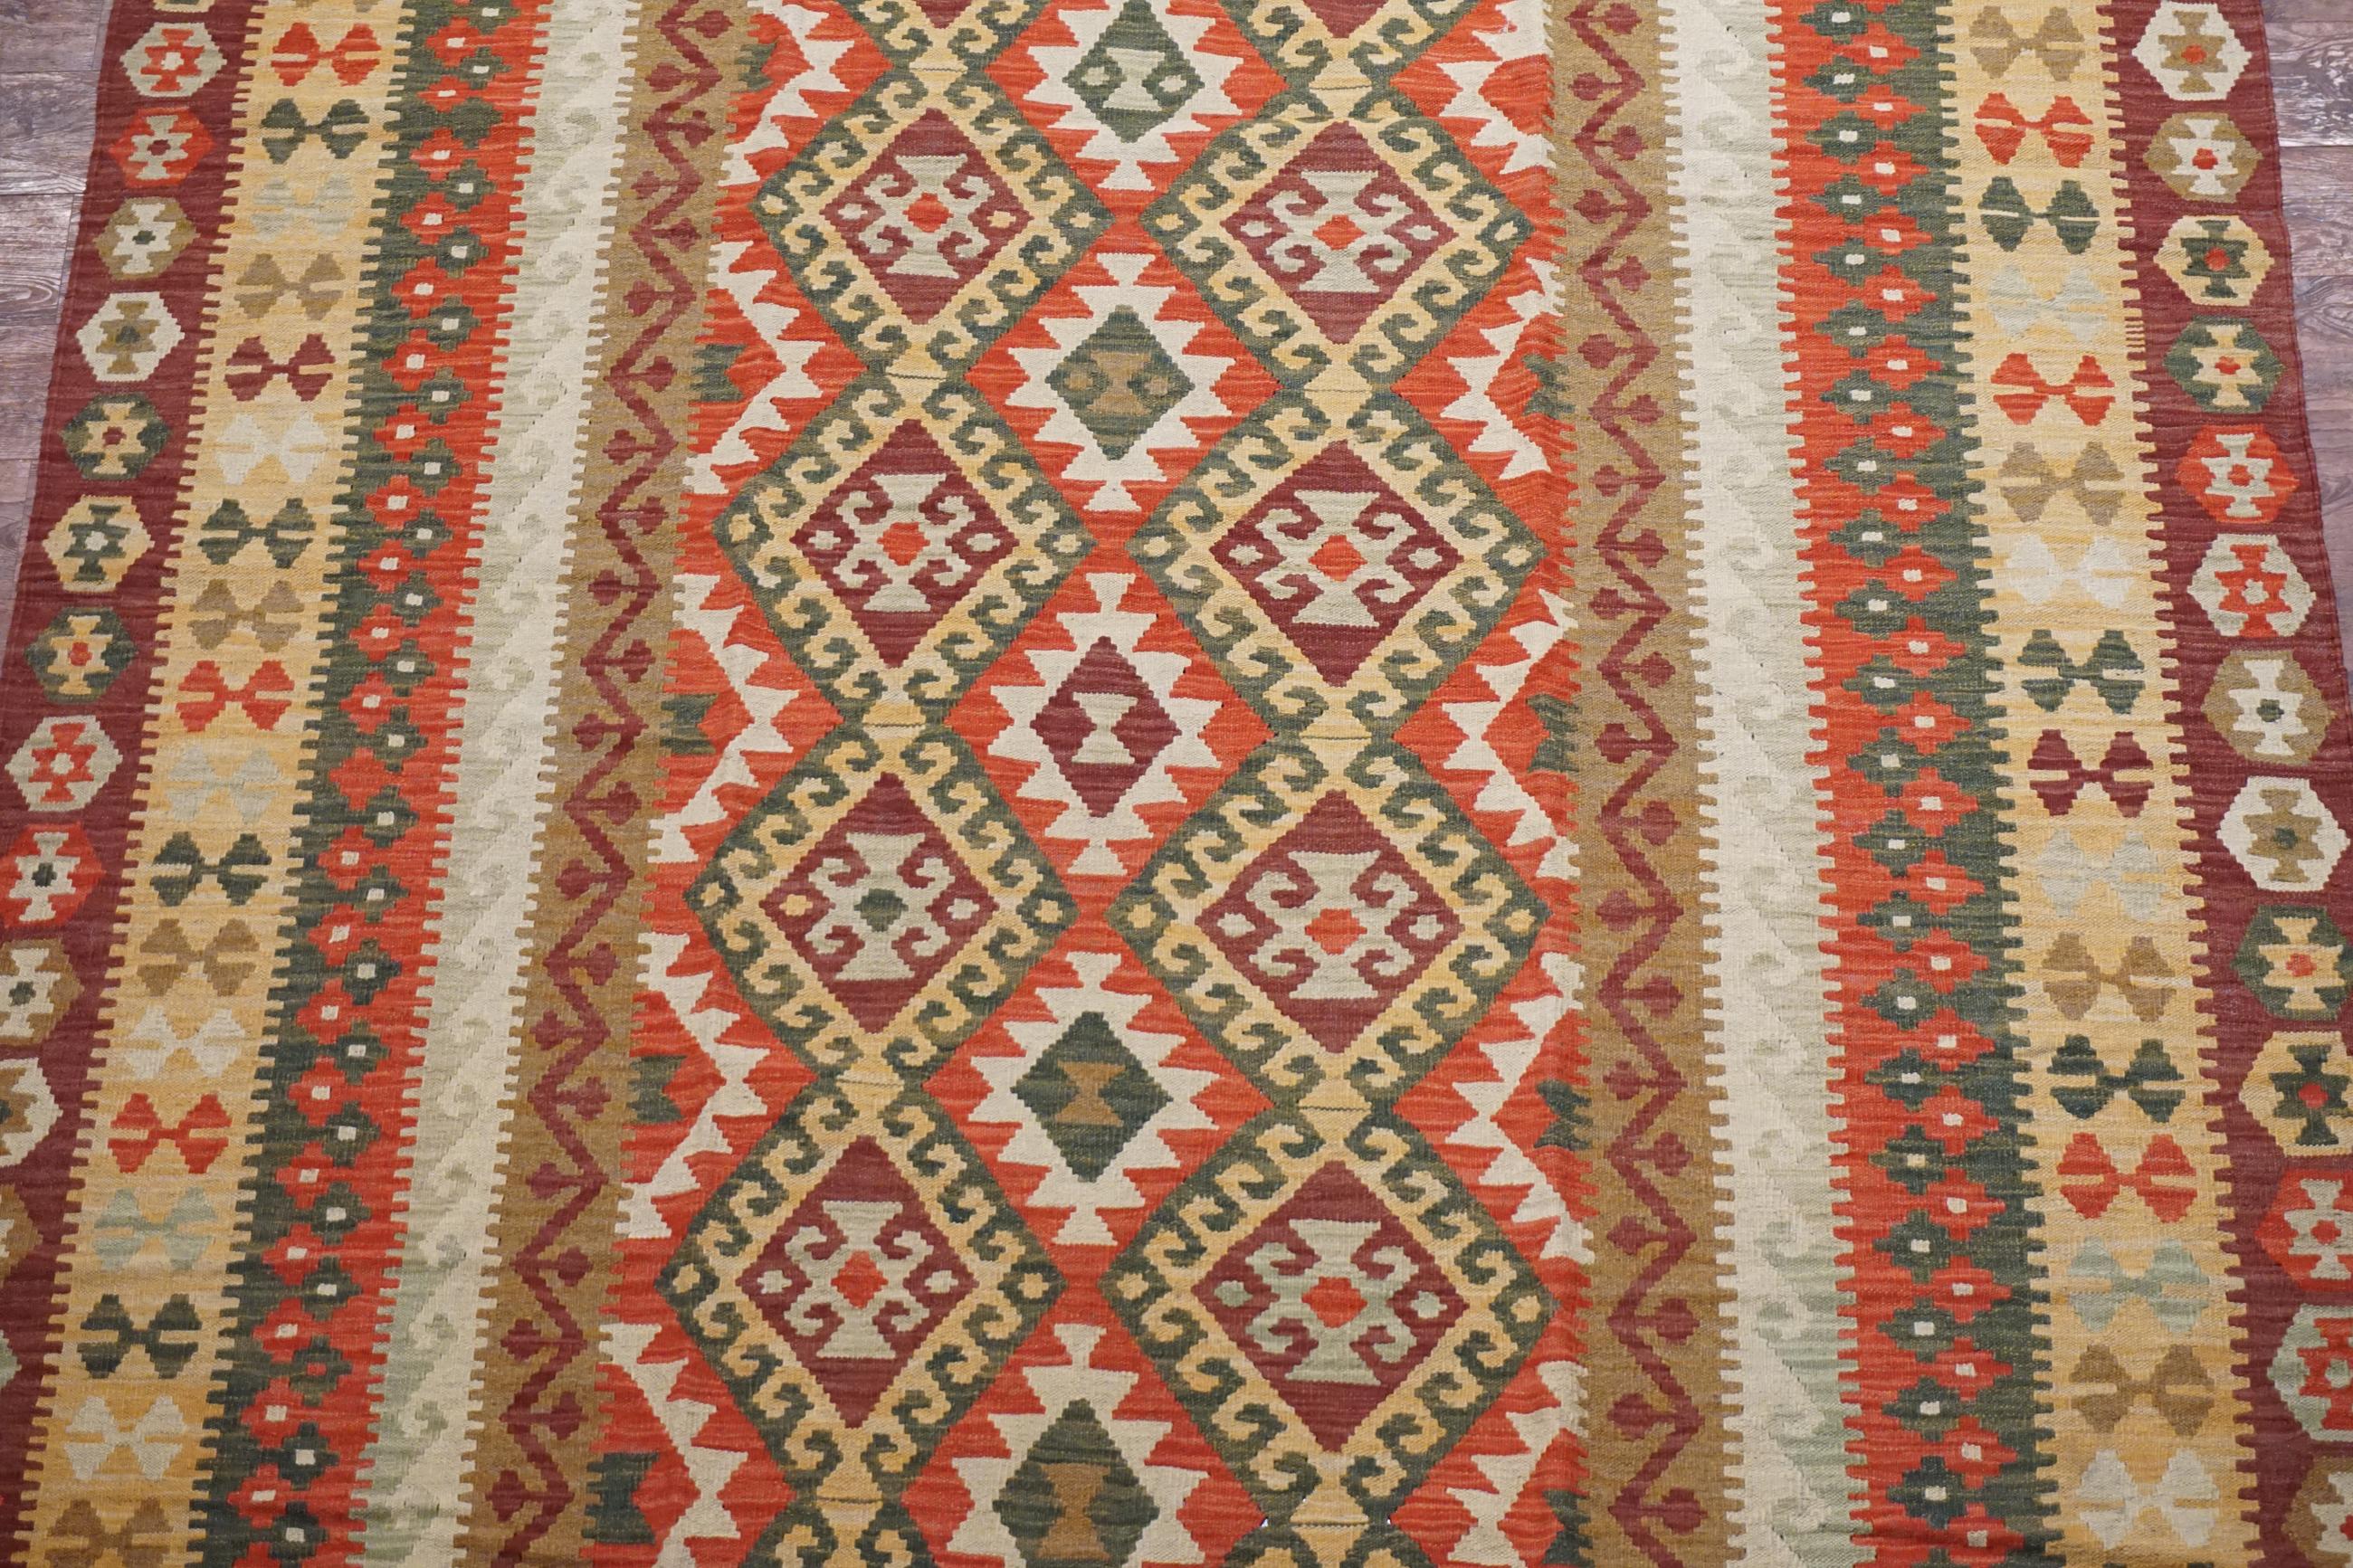 Afghan Tribal Chobi Kilim Rug In Excellent Condition For Sale In Northridge, CA